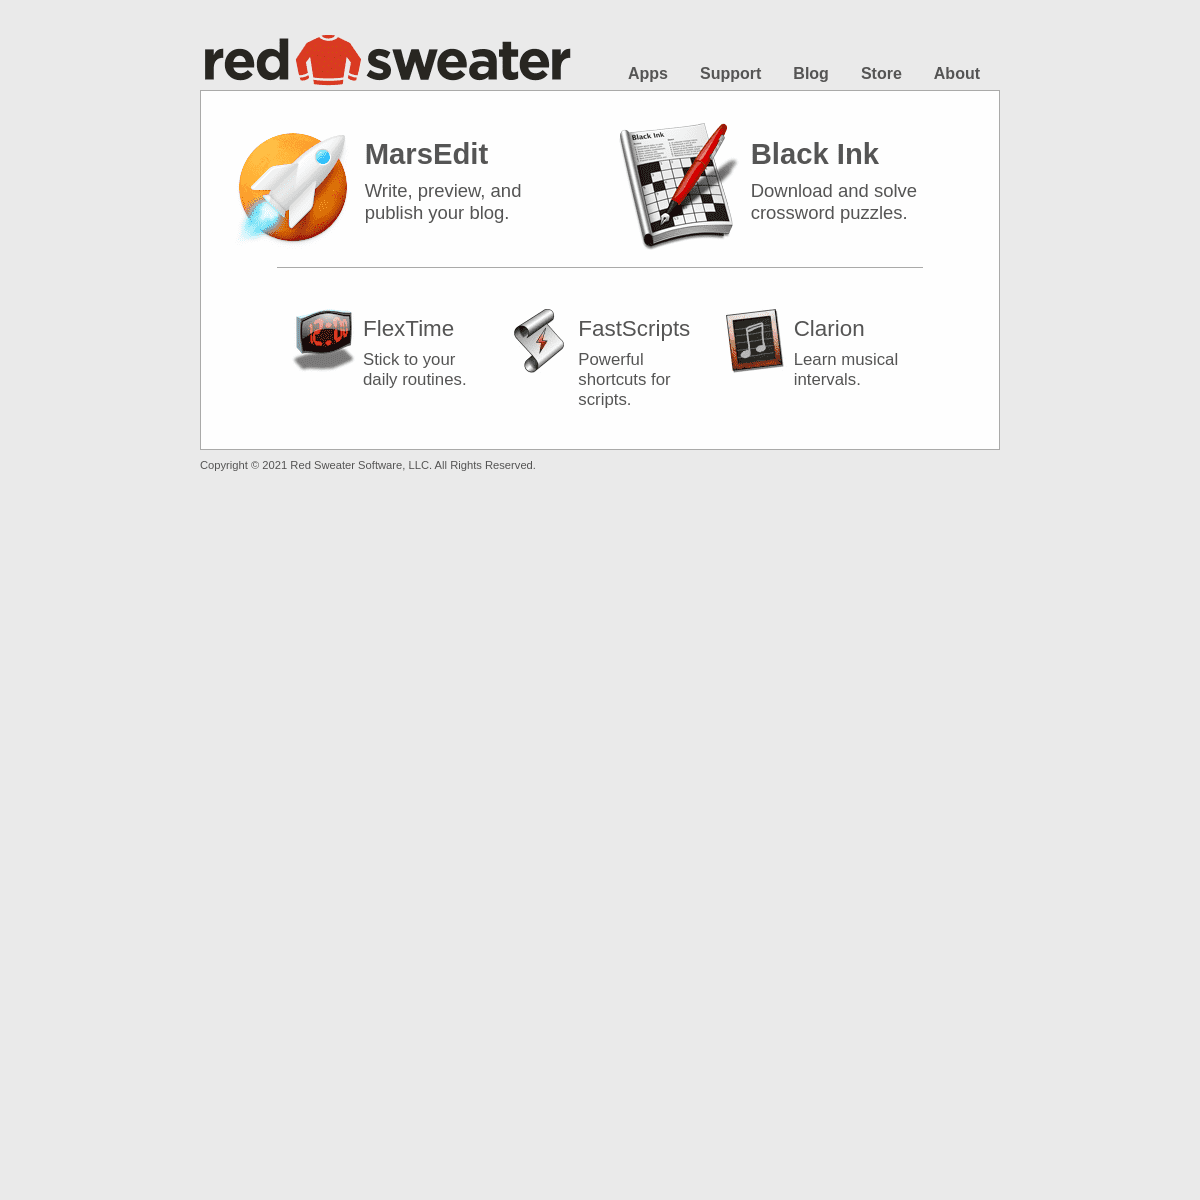 A complete backup of https://redsweater.com